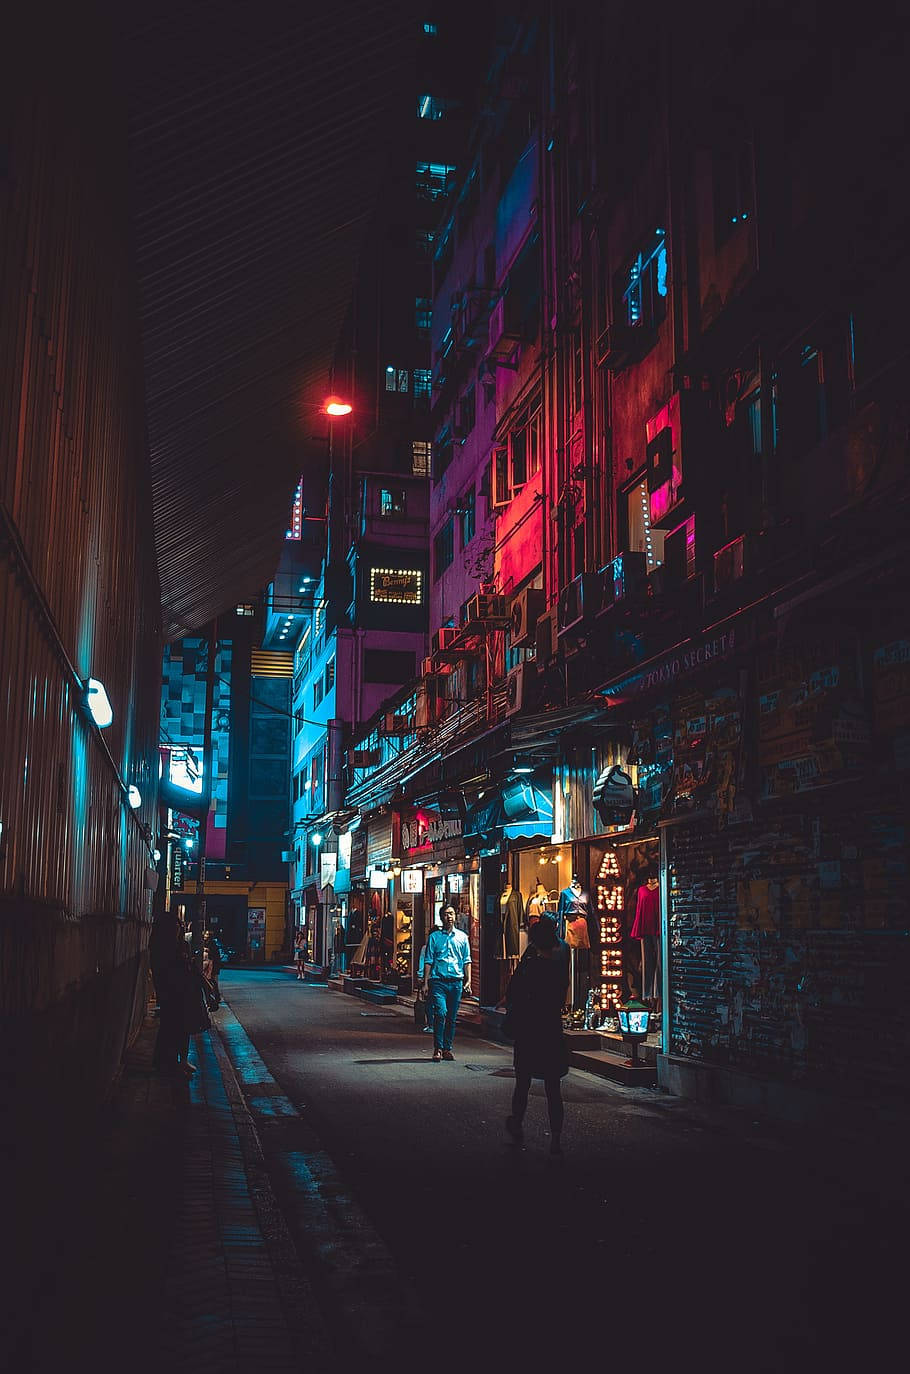 Vibey Japanese Alley